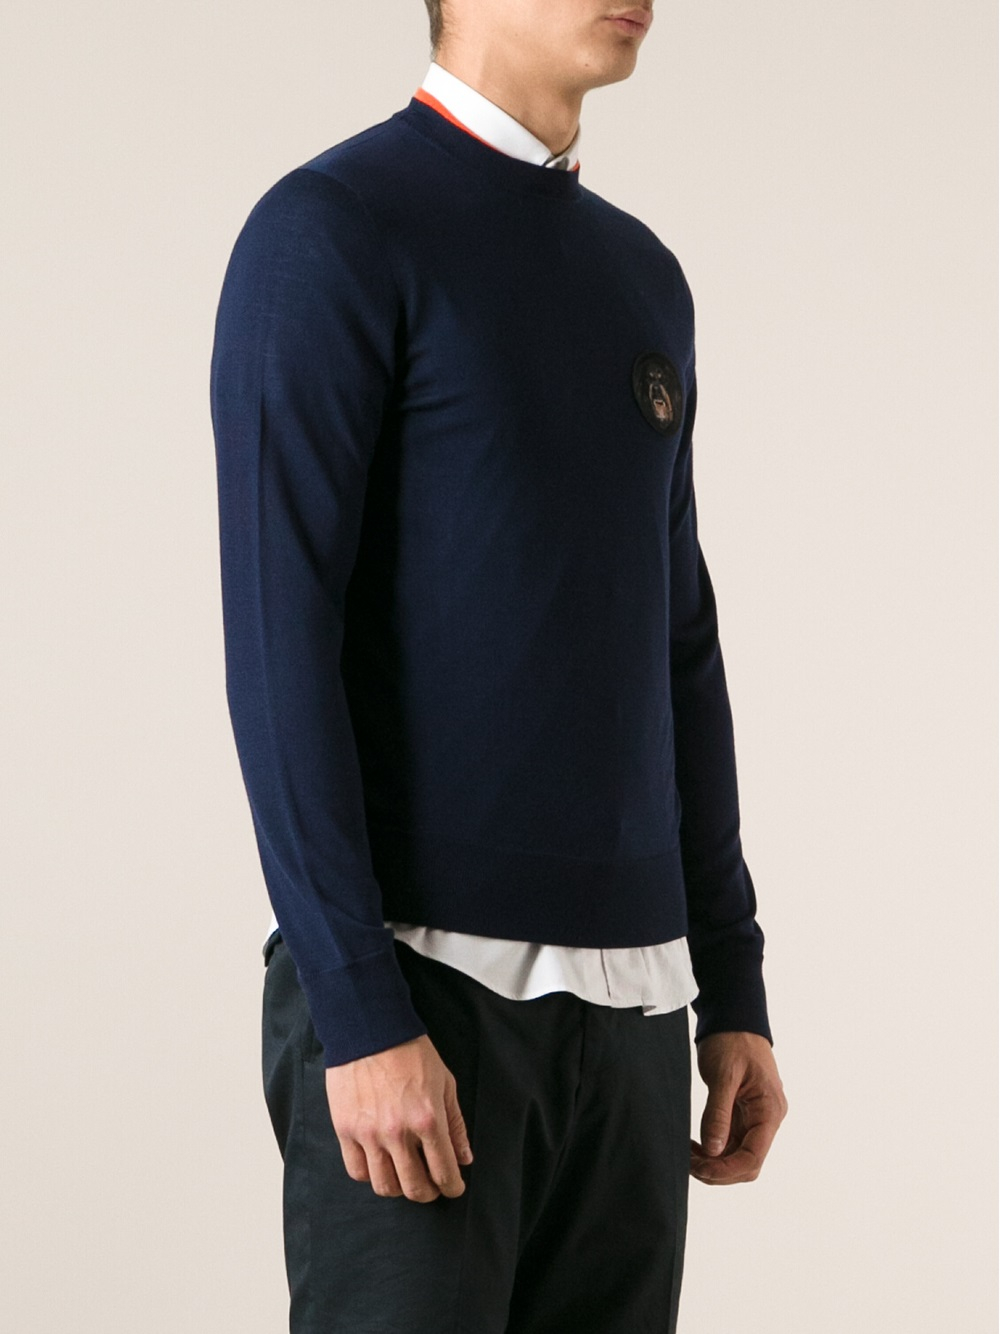 Lyst - Givenchy Logo Knit Sweater in Blue for Men